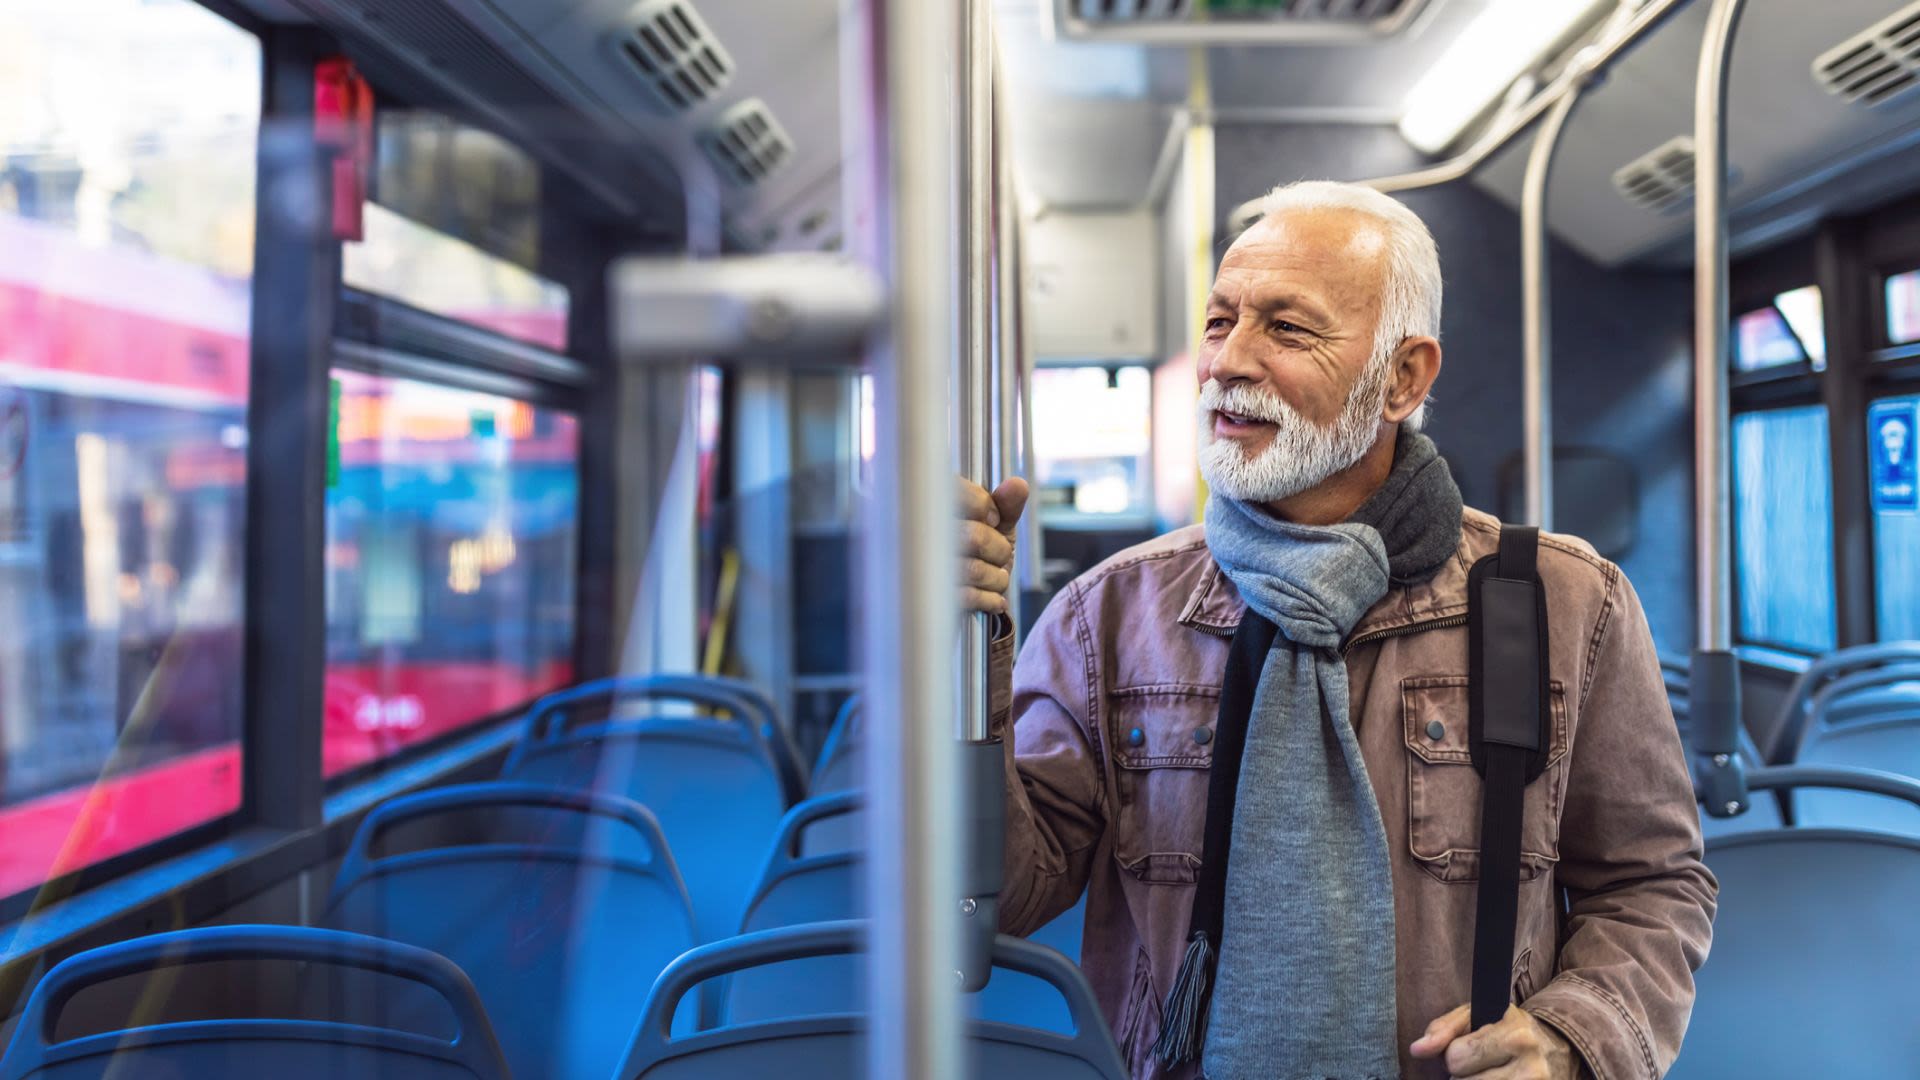 10 Cities Retirees Should Avoid Due to High Transportation Costs